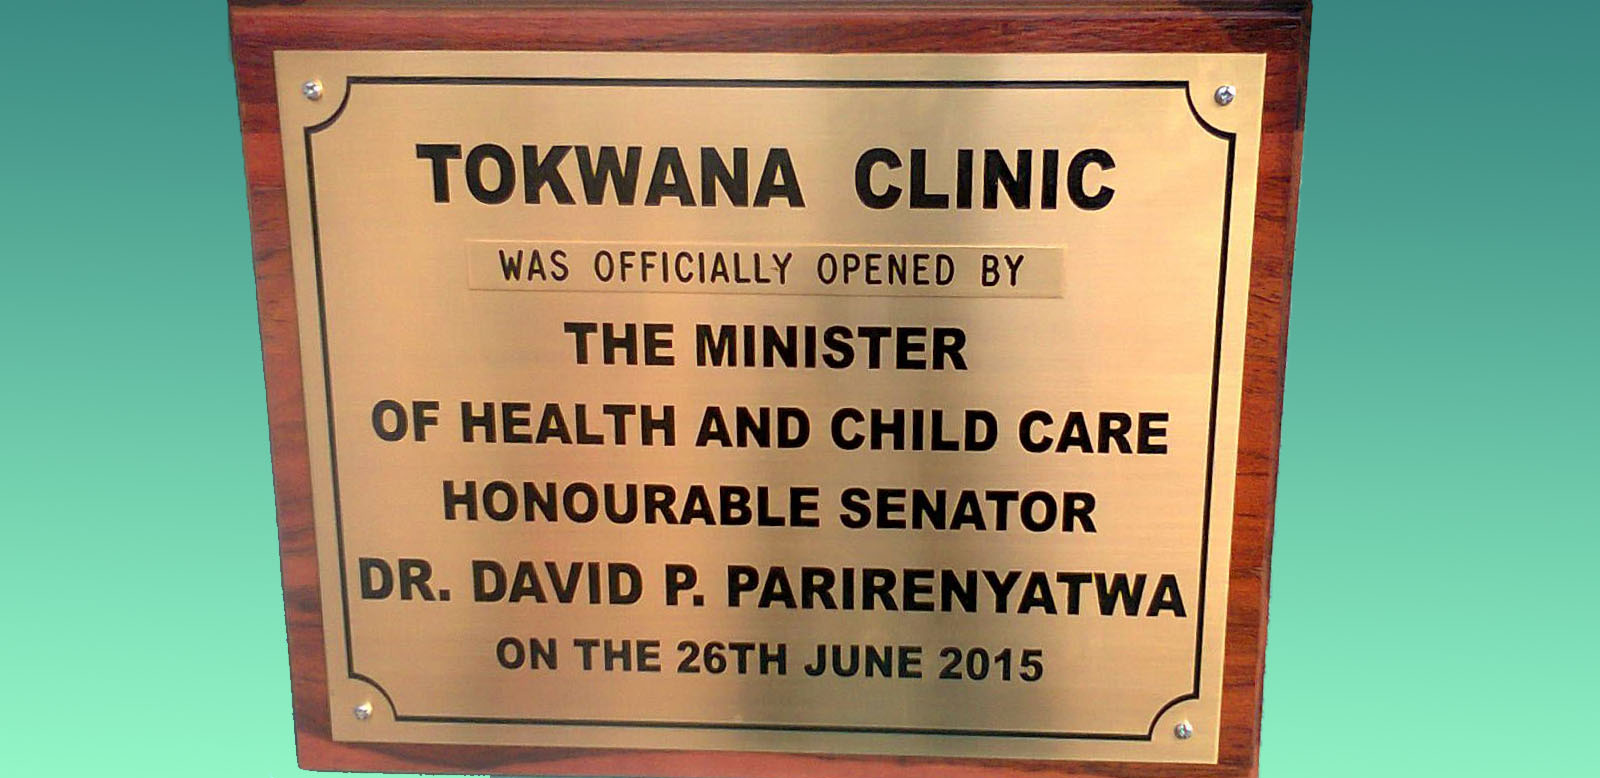 Community comes together with their children to build the Tokwana Clinic